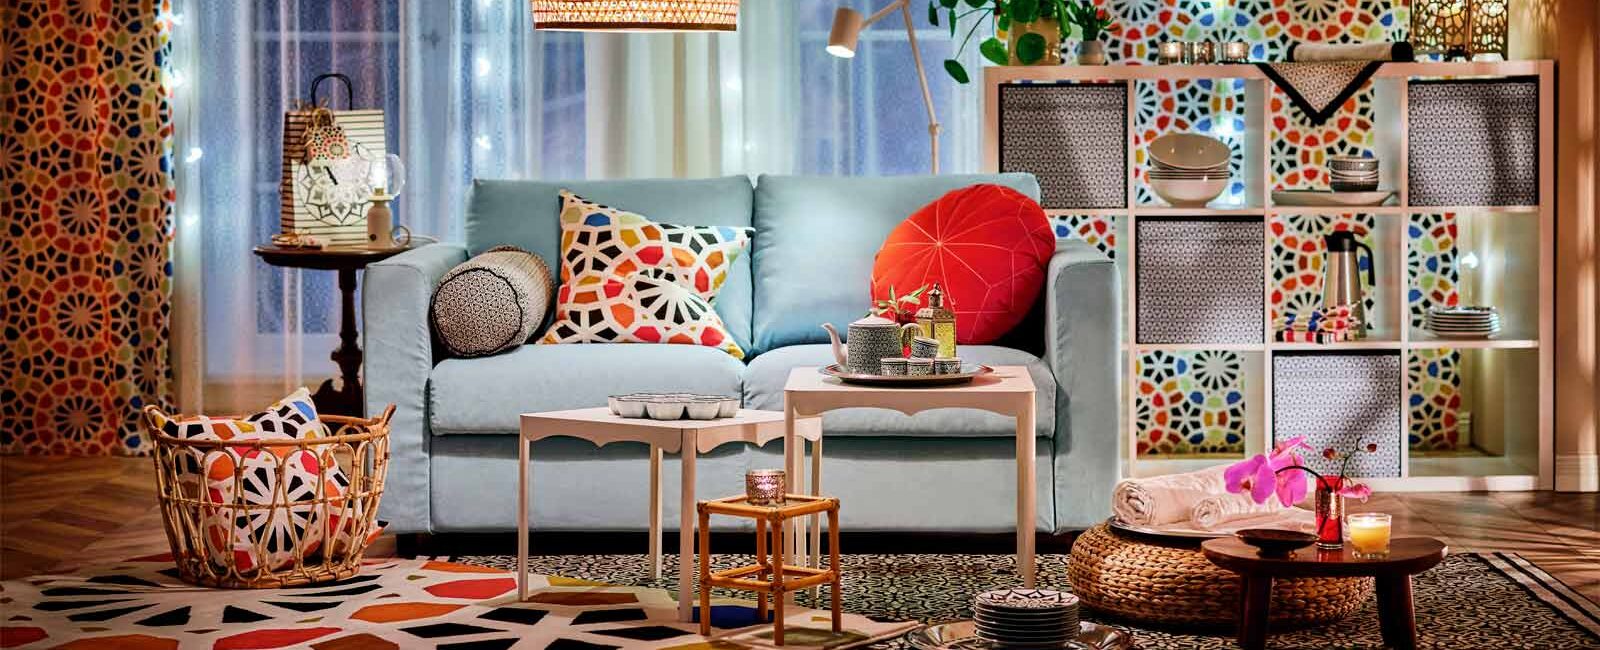 Ikea’s latest collection is inspired by Moroccan patterns